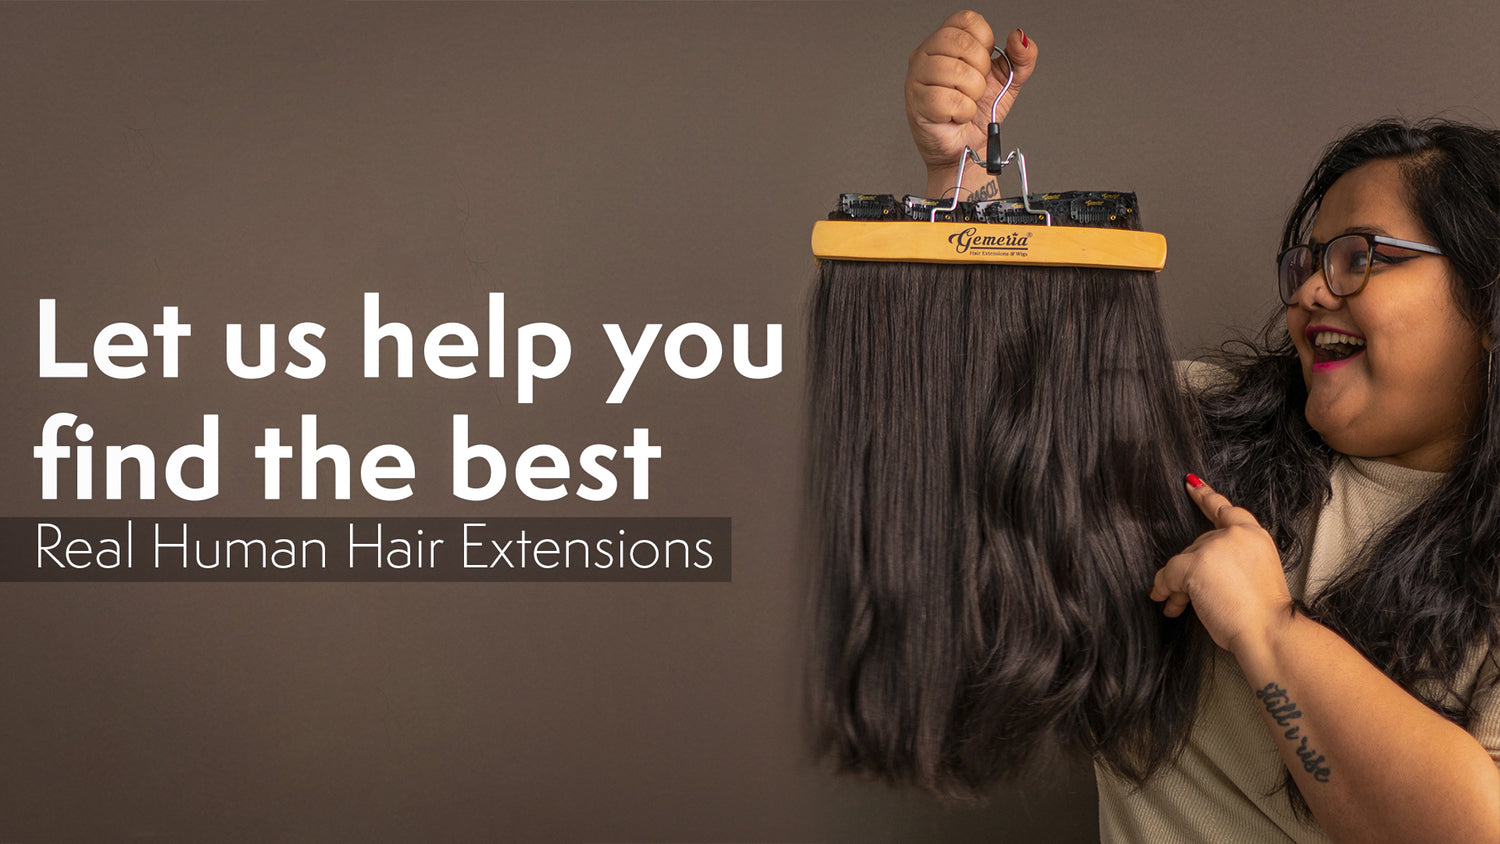 Let us help you find the best real human hair extensions